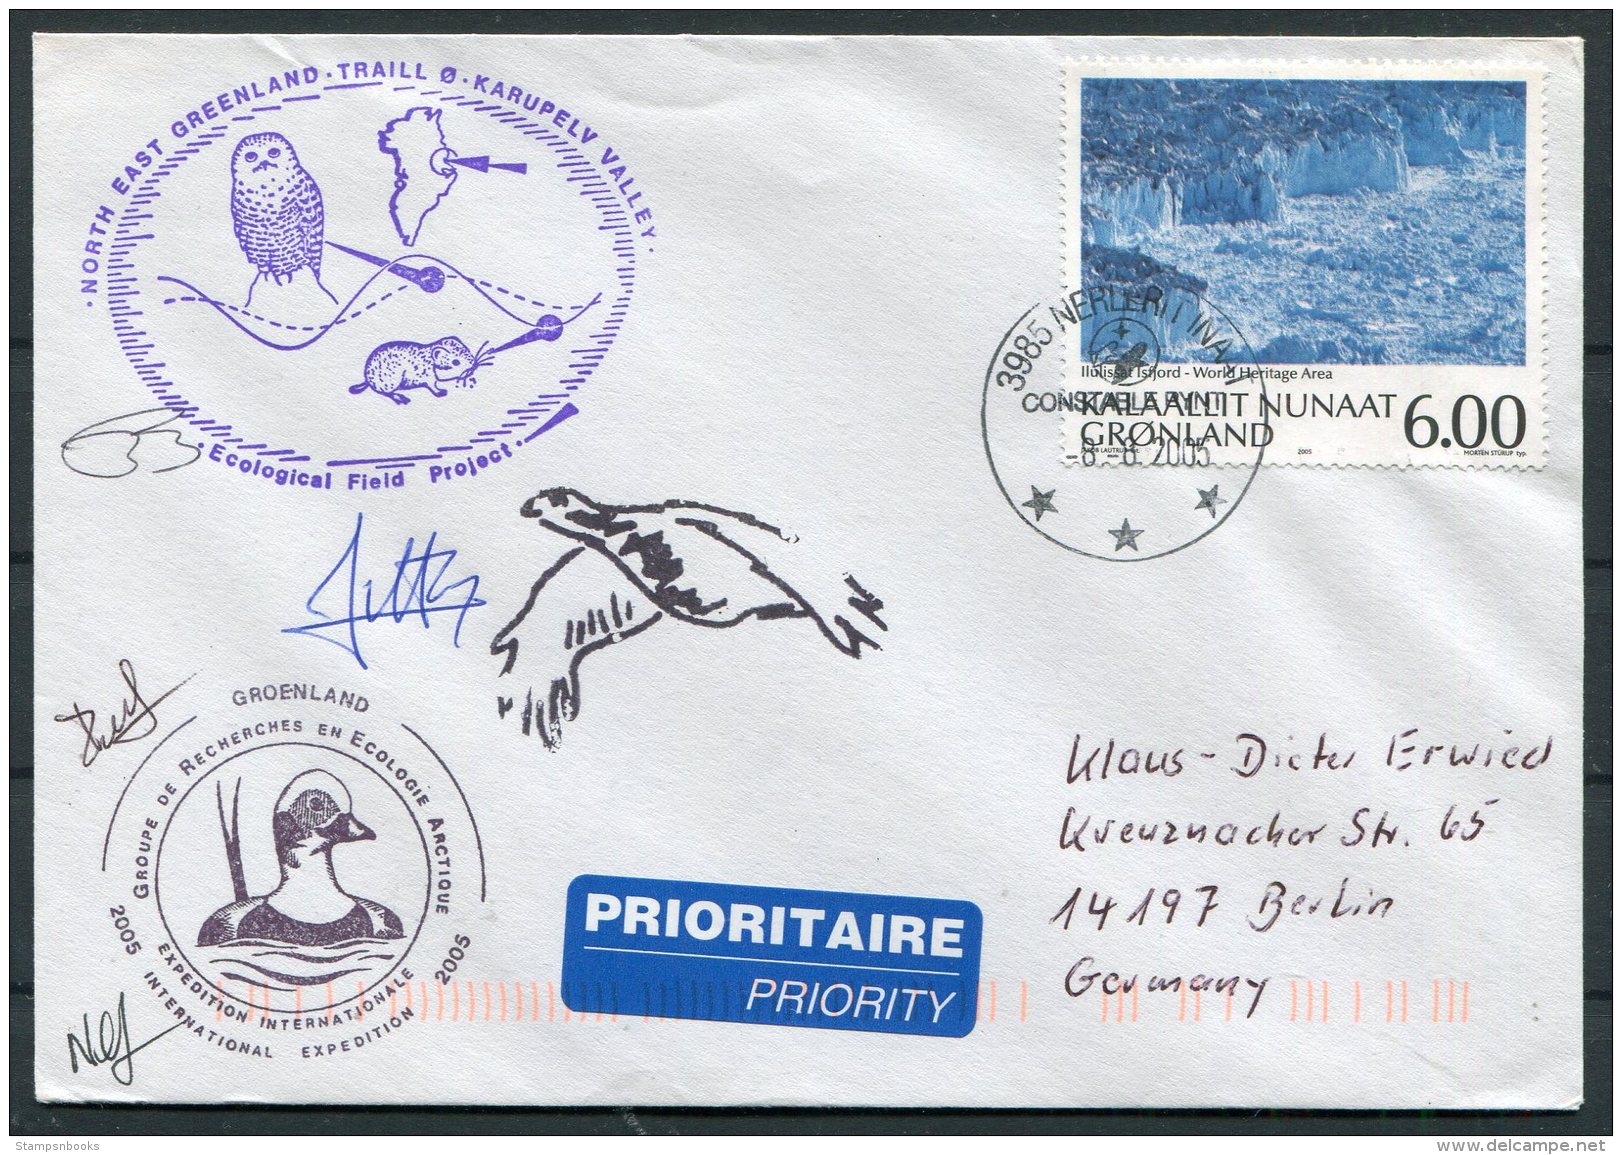 2005 North East Greenland, Karupelv Valley, Polar Owl Birds Research Arctic Expedition Signed Cover - Covers & Documents